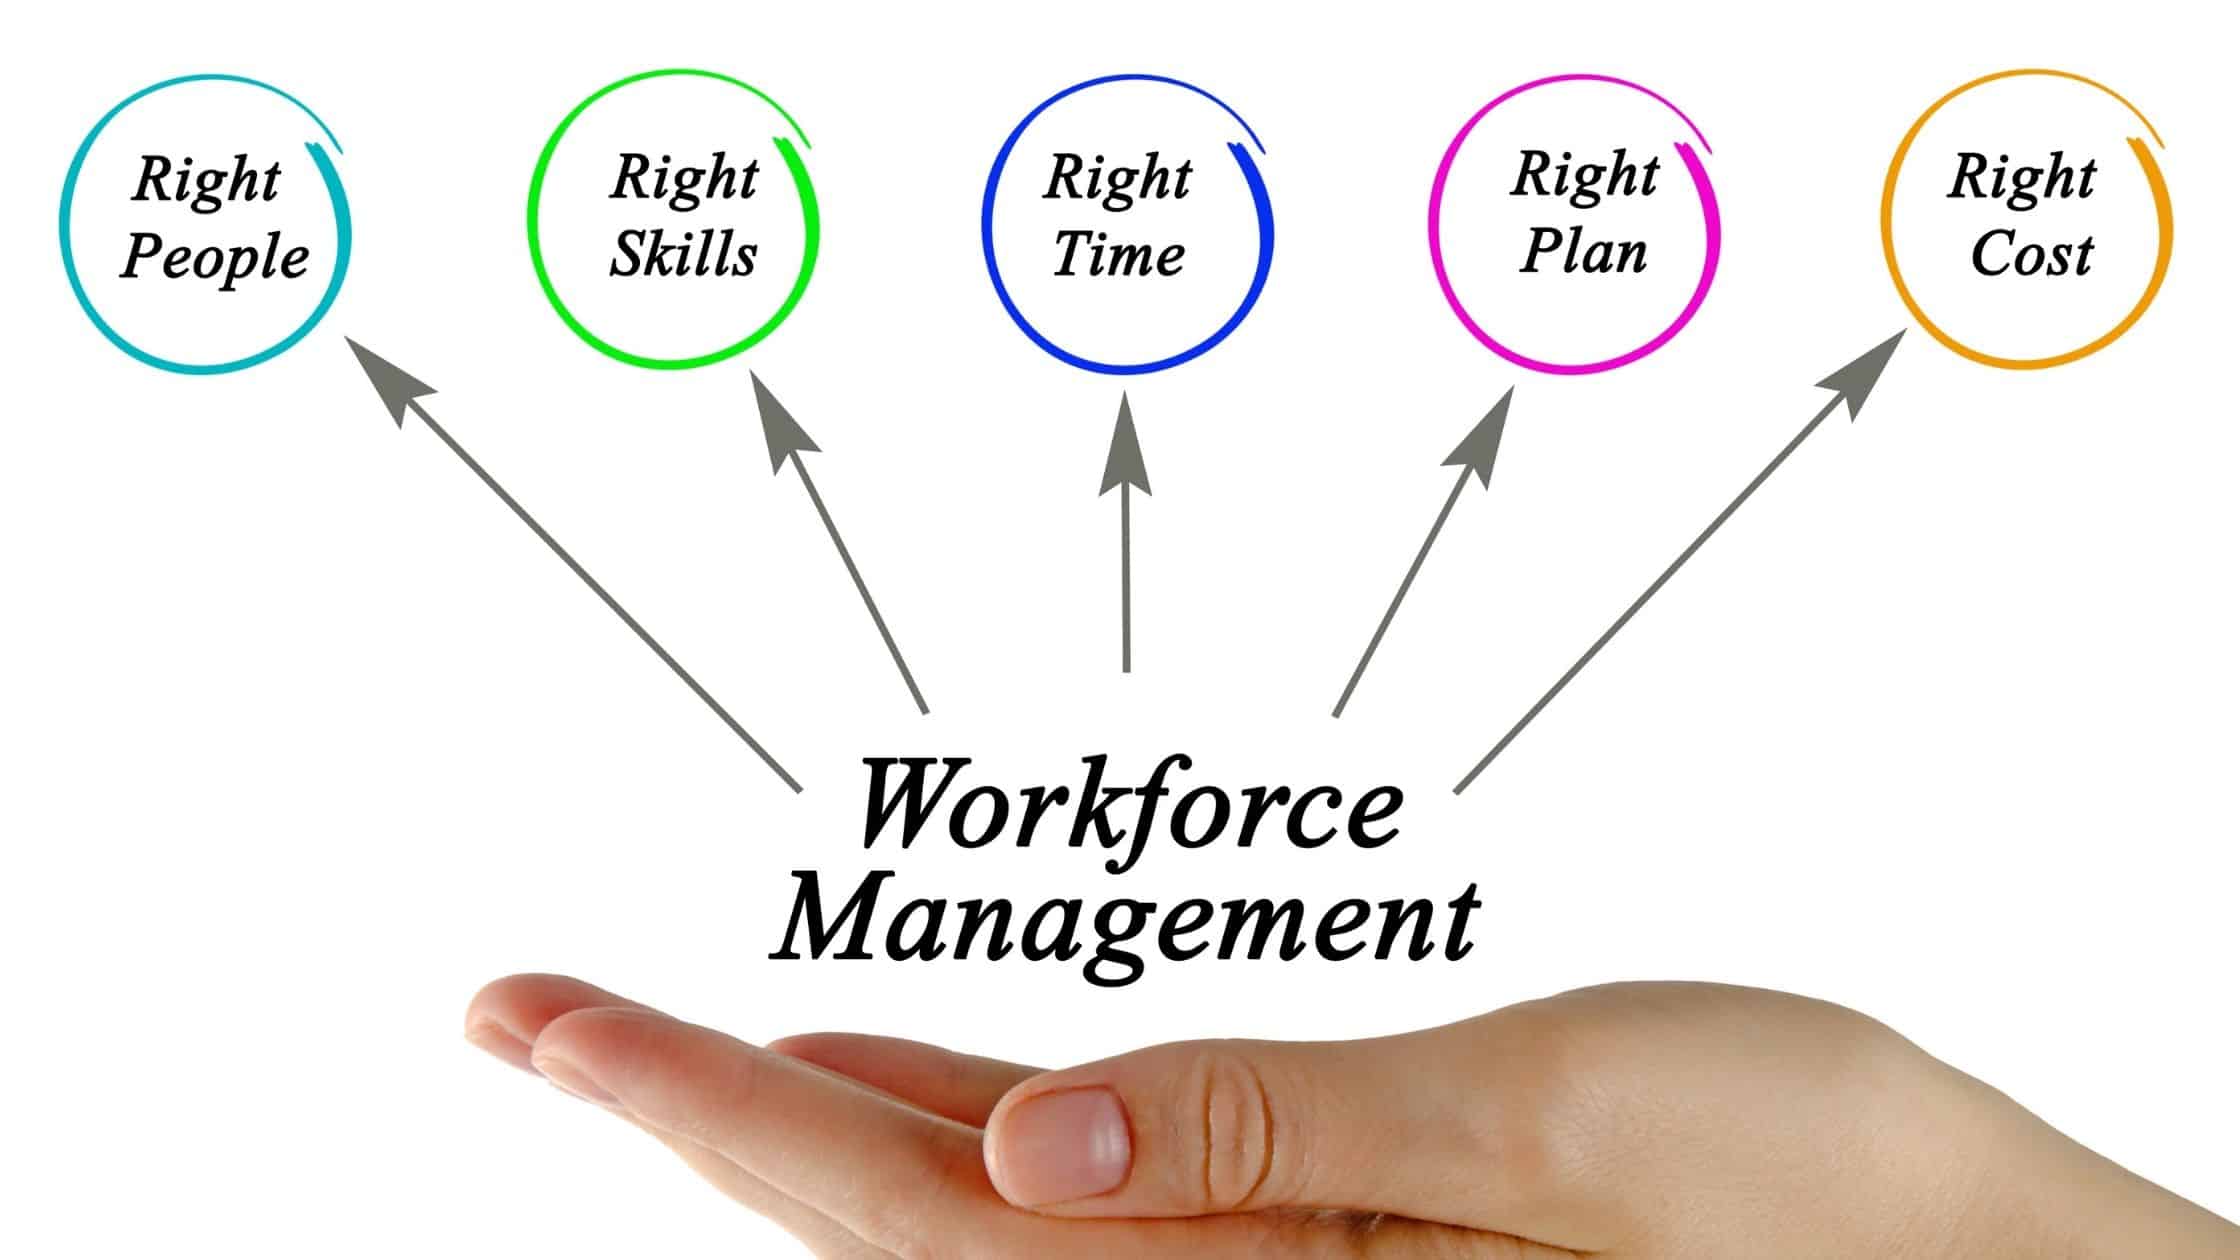 What is Workforce Management? - Definition from WhatIs.com